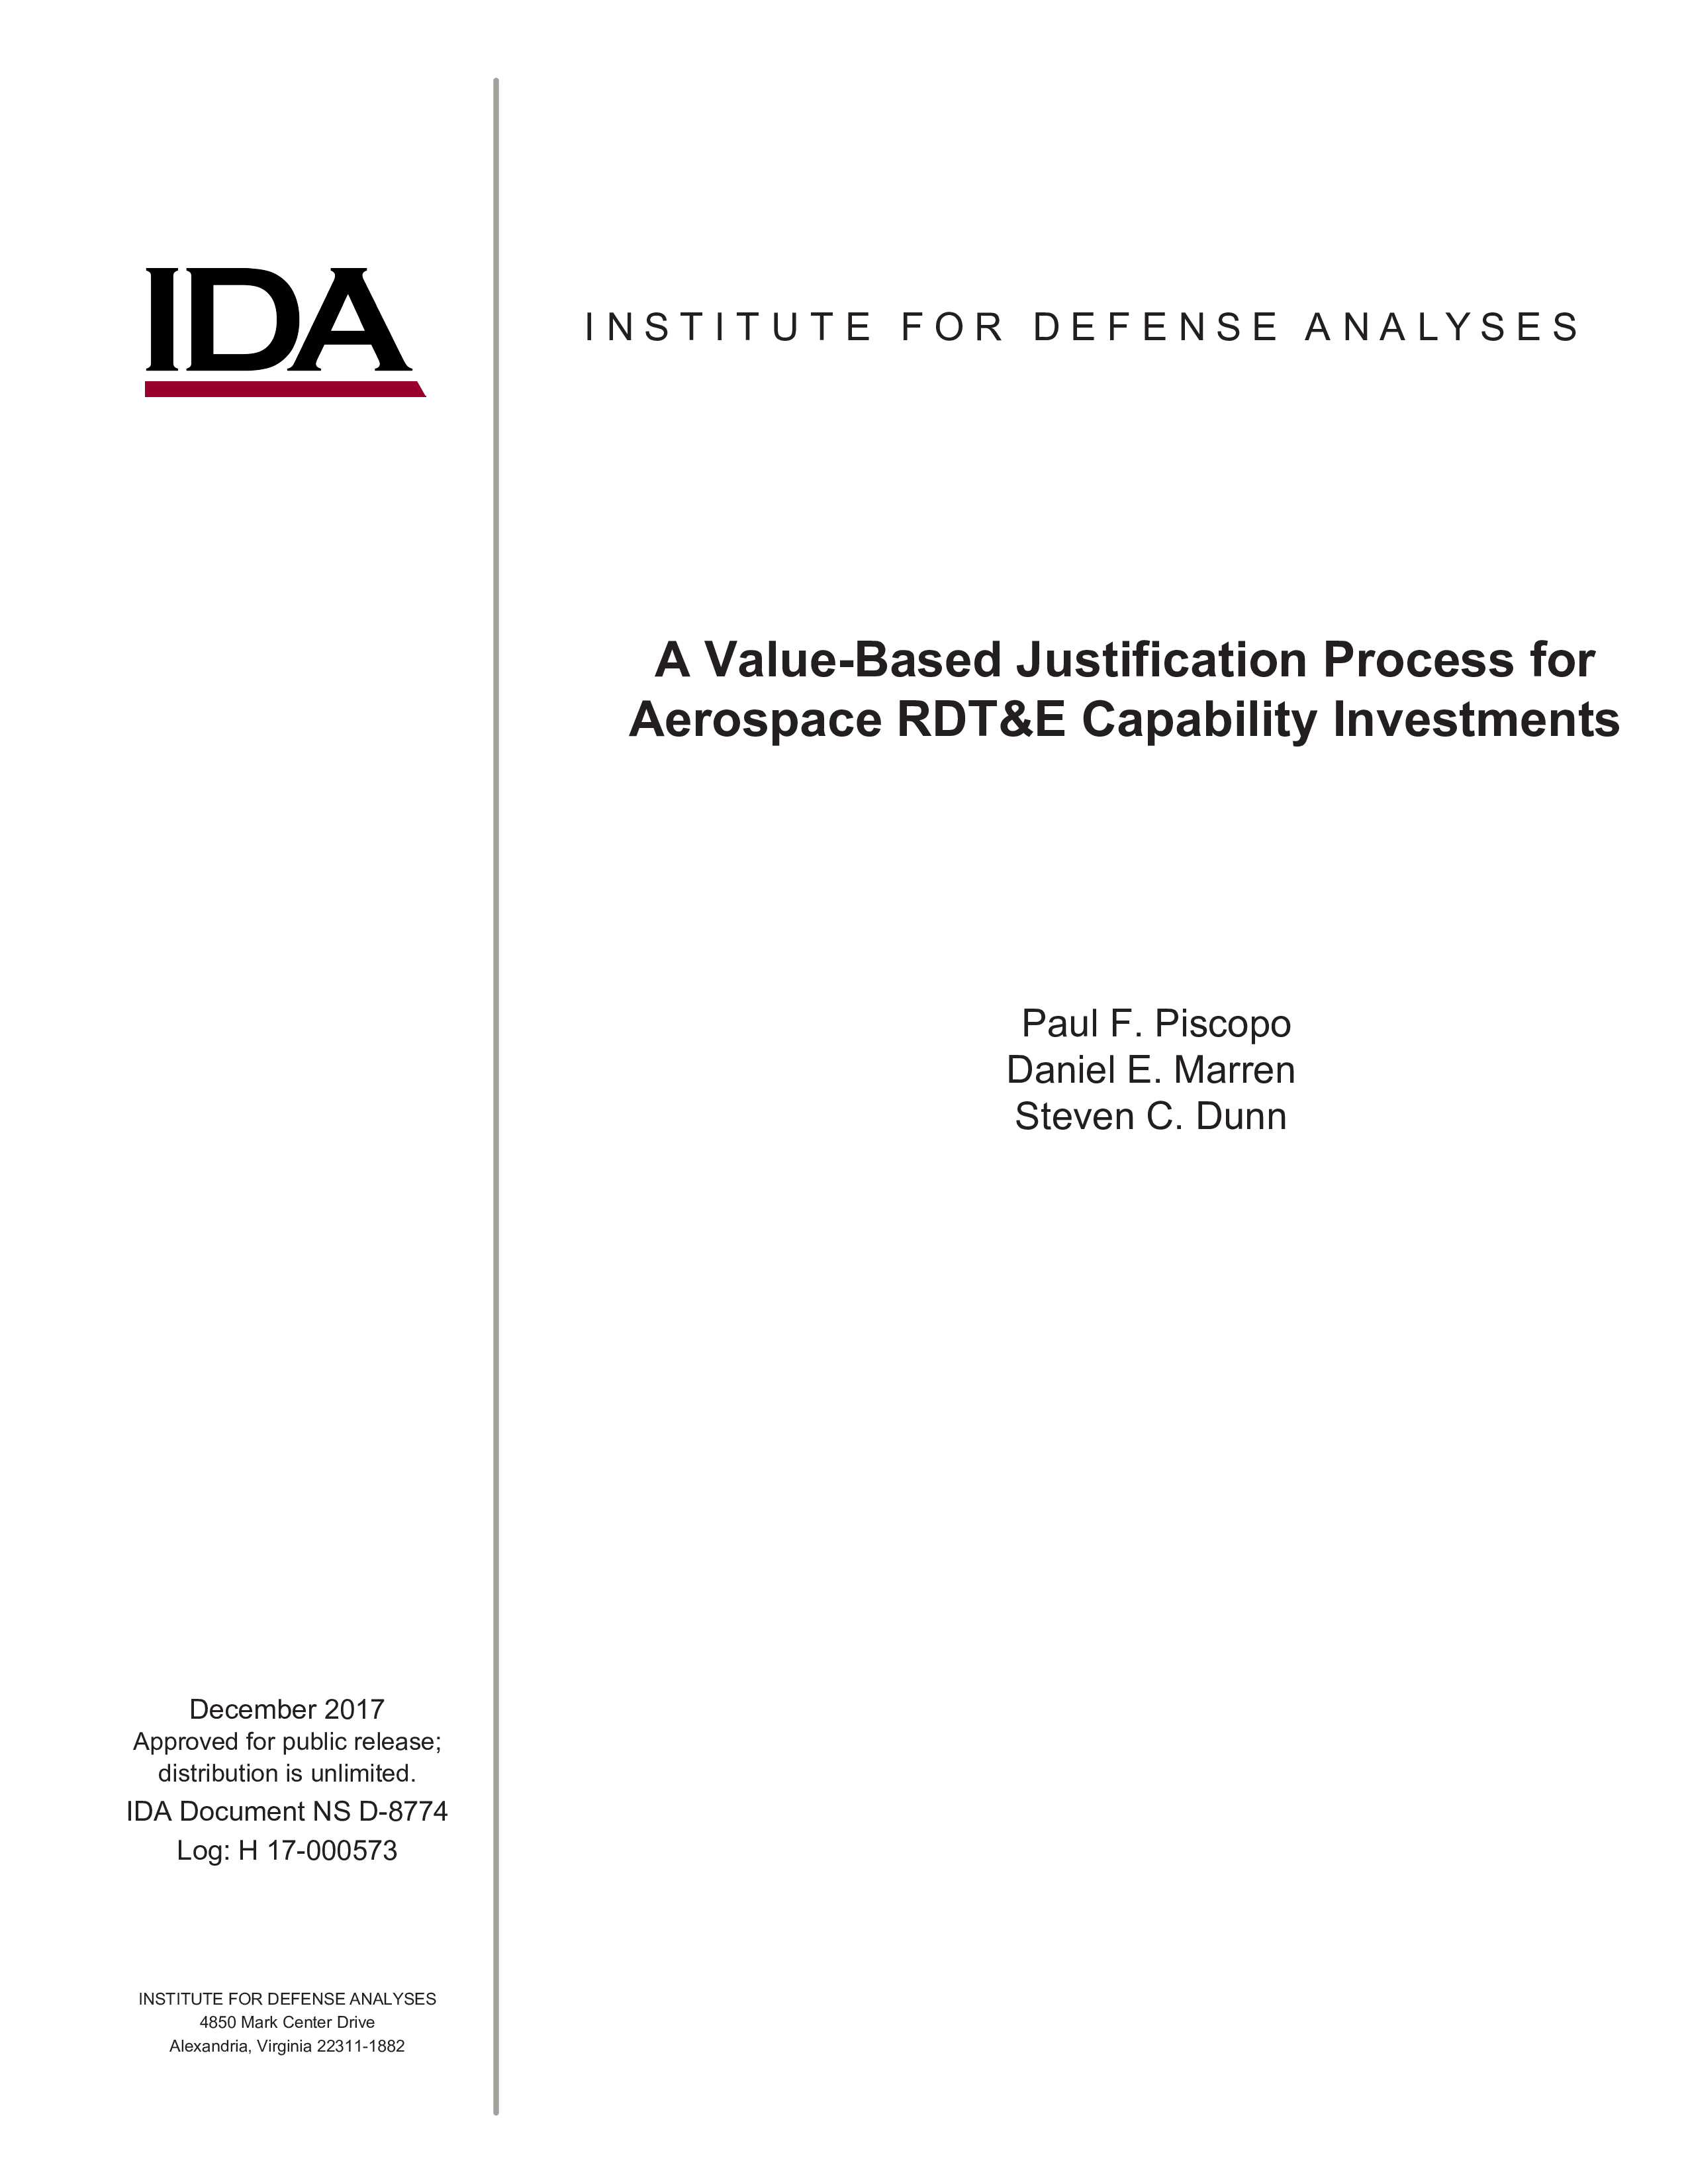 A Value-Based Justification Process for Aerospace RDT&E Capability Investments